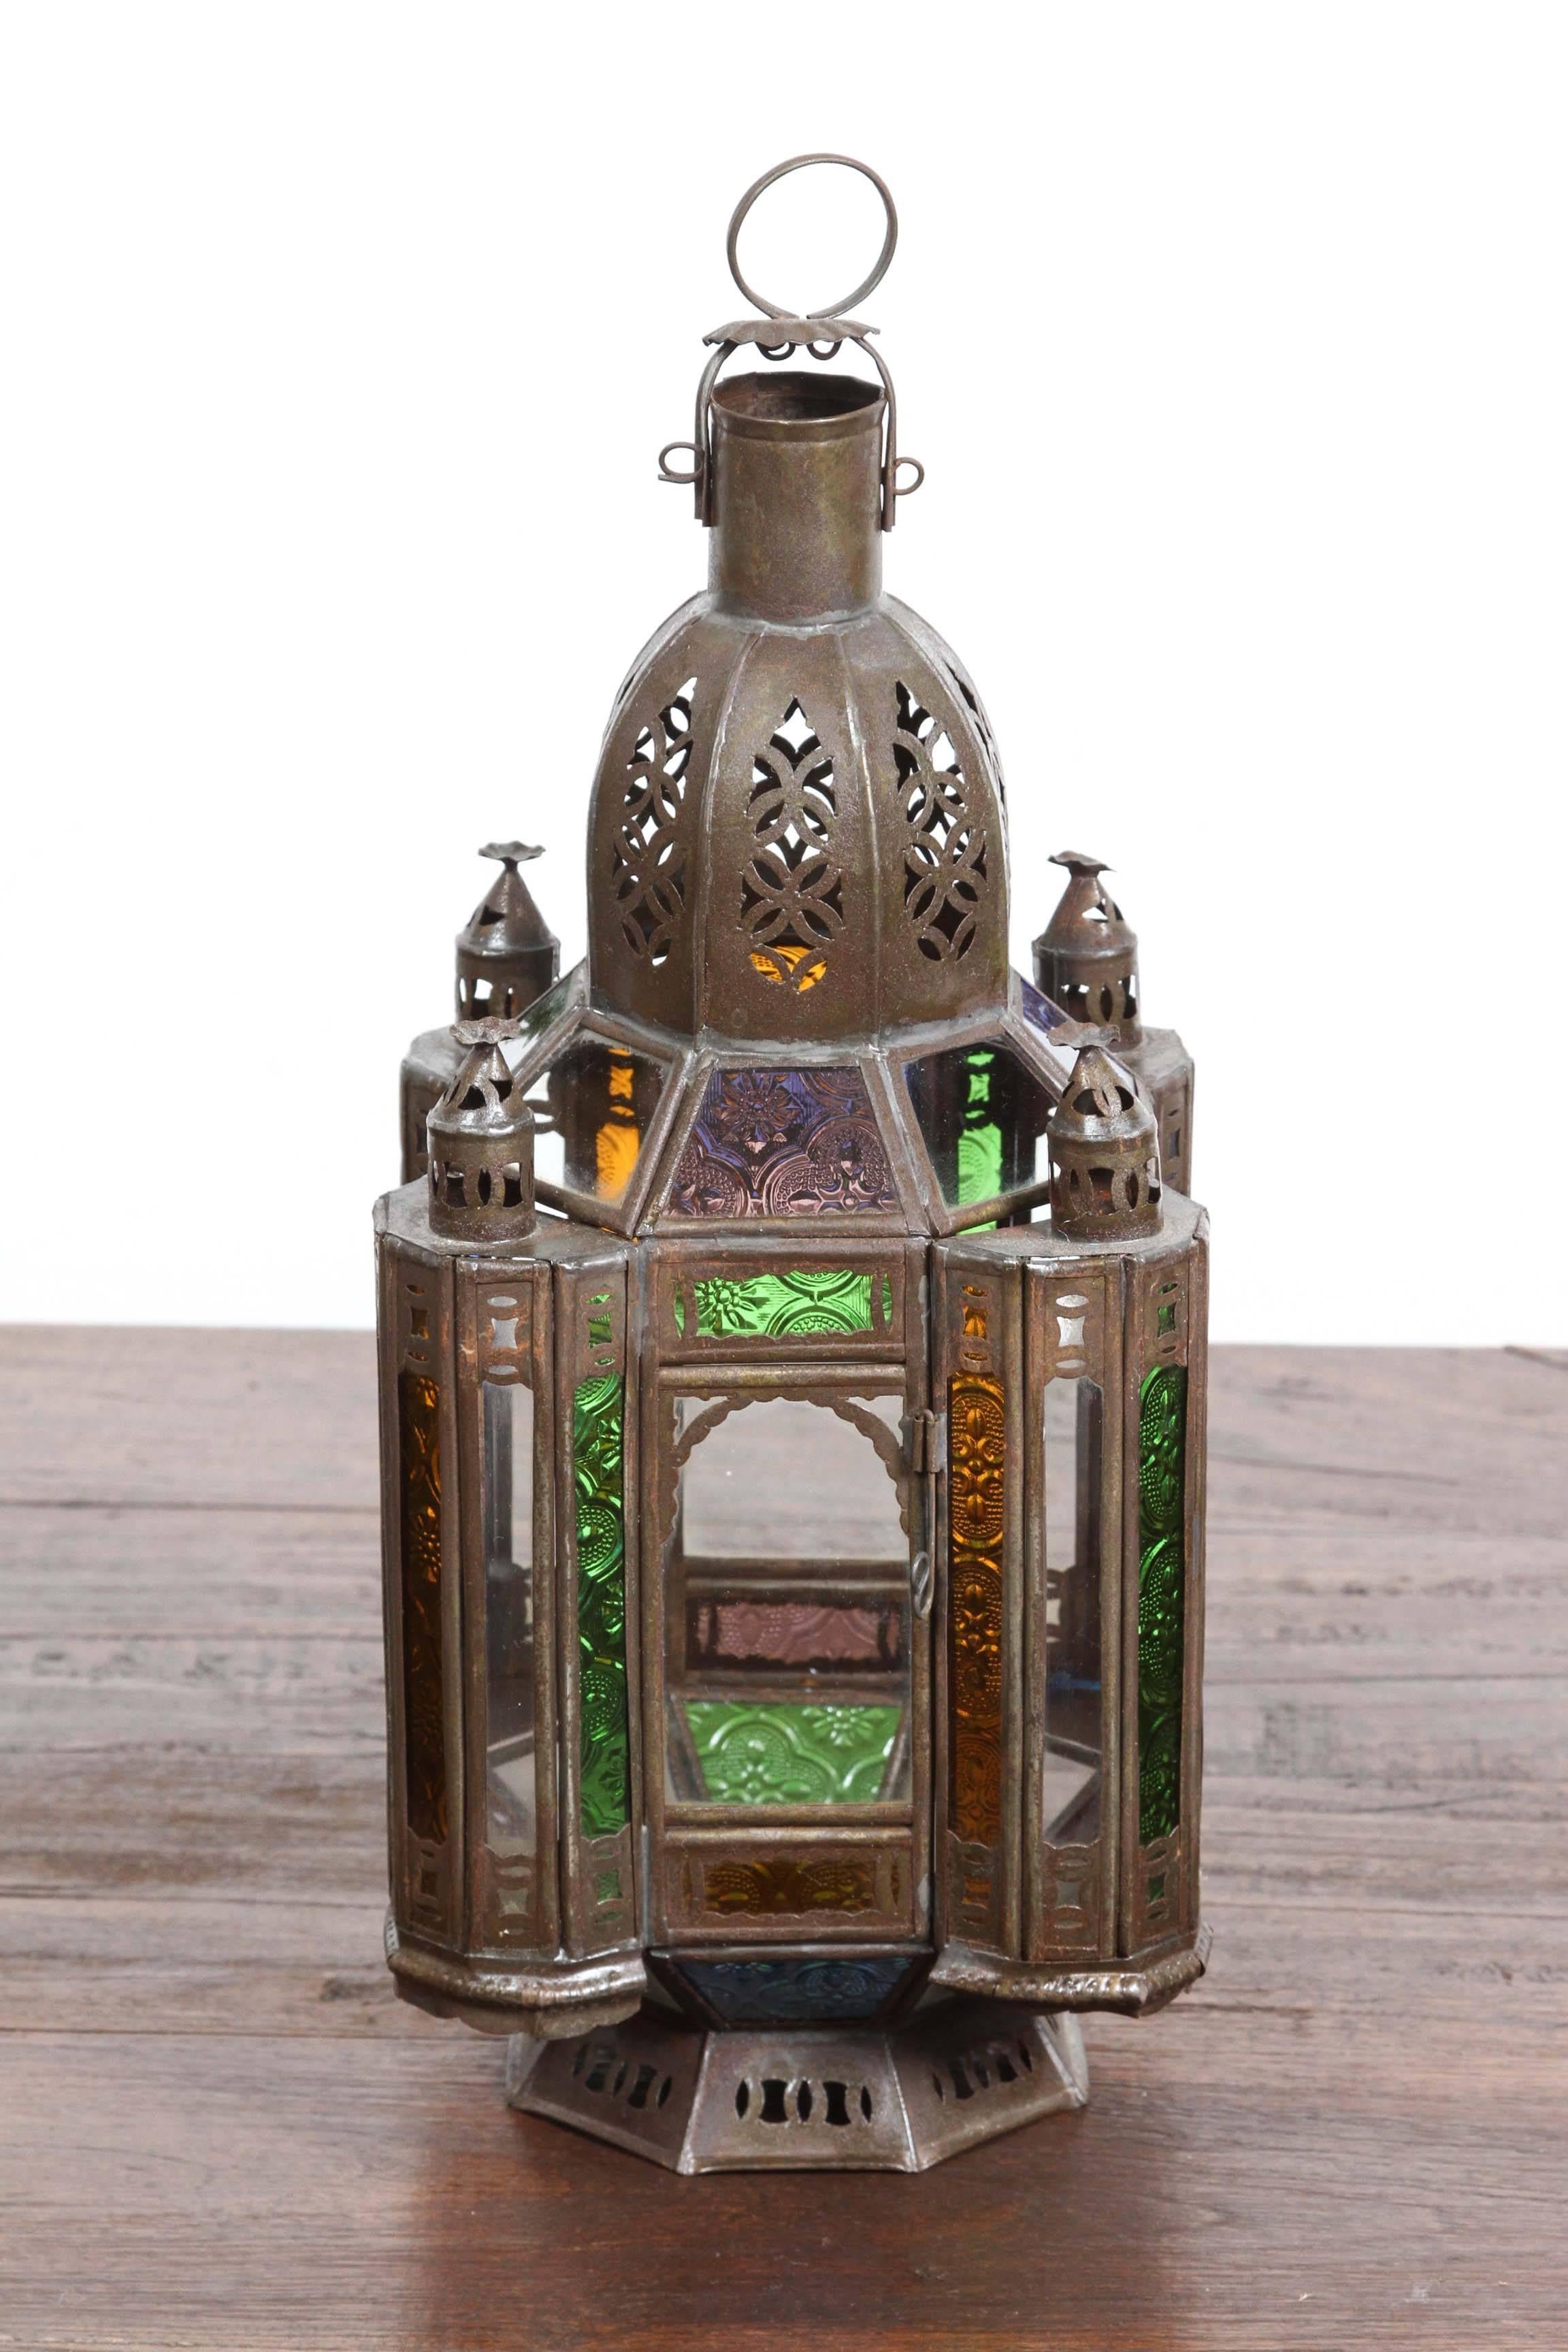 Handcrafted metal Moroccan lantern with clear and colored glass in blue, green amber and lavender.
Hurricane candle lamp square metal lantern with octagonal base, there is a small door on the side that open for easy access to add a candle, and has a